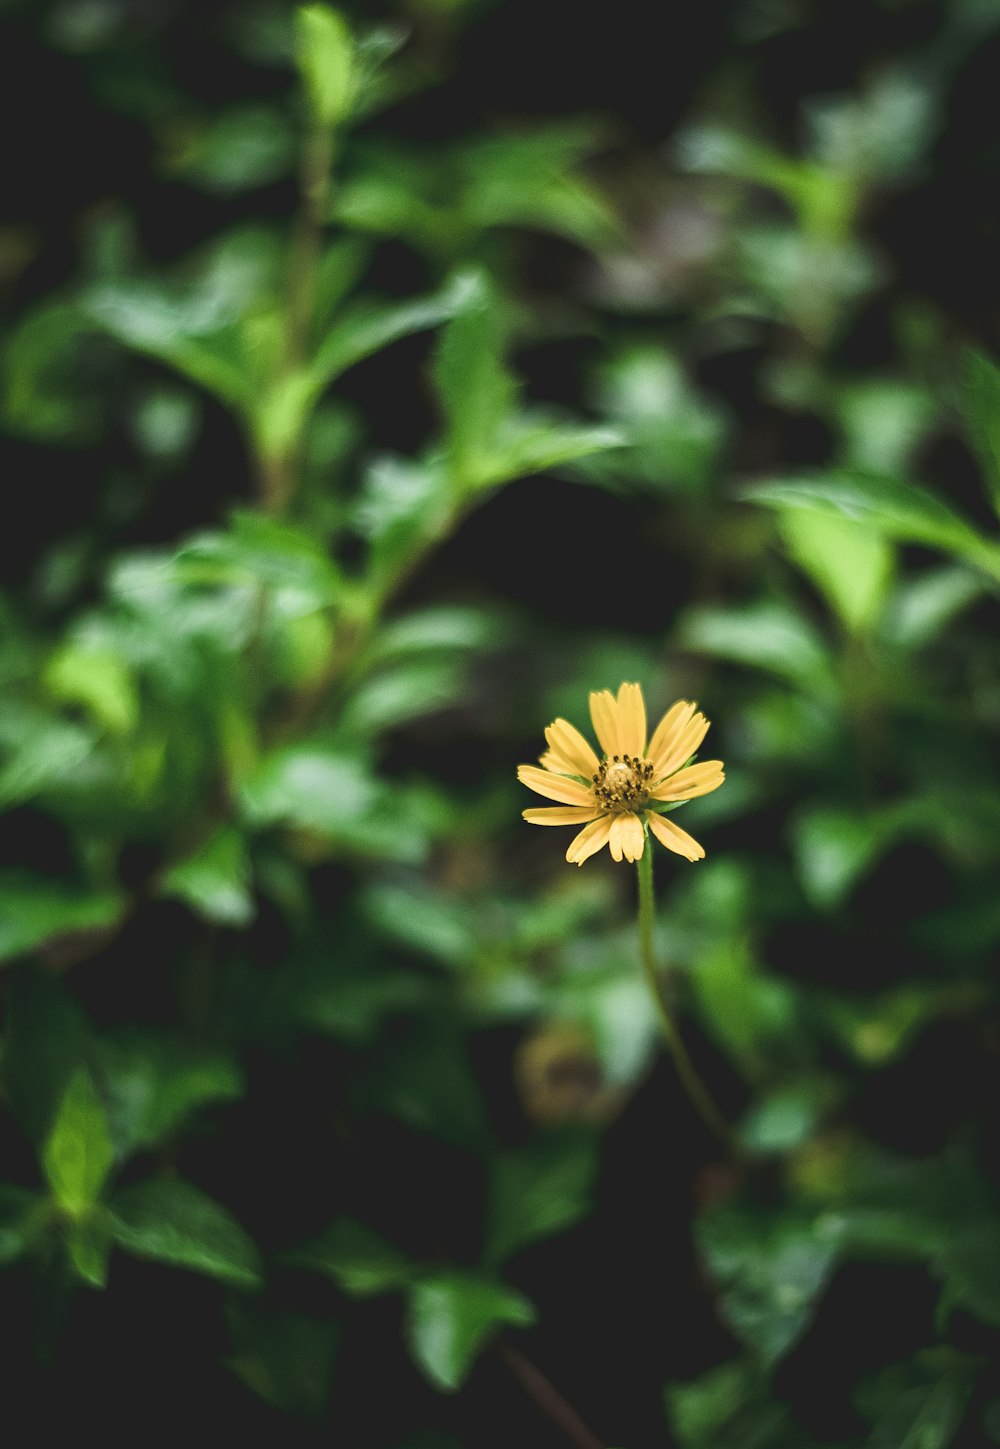 a single yellow flower in the middle of some green leaves